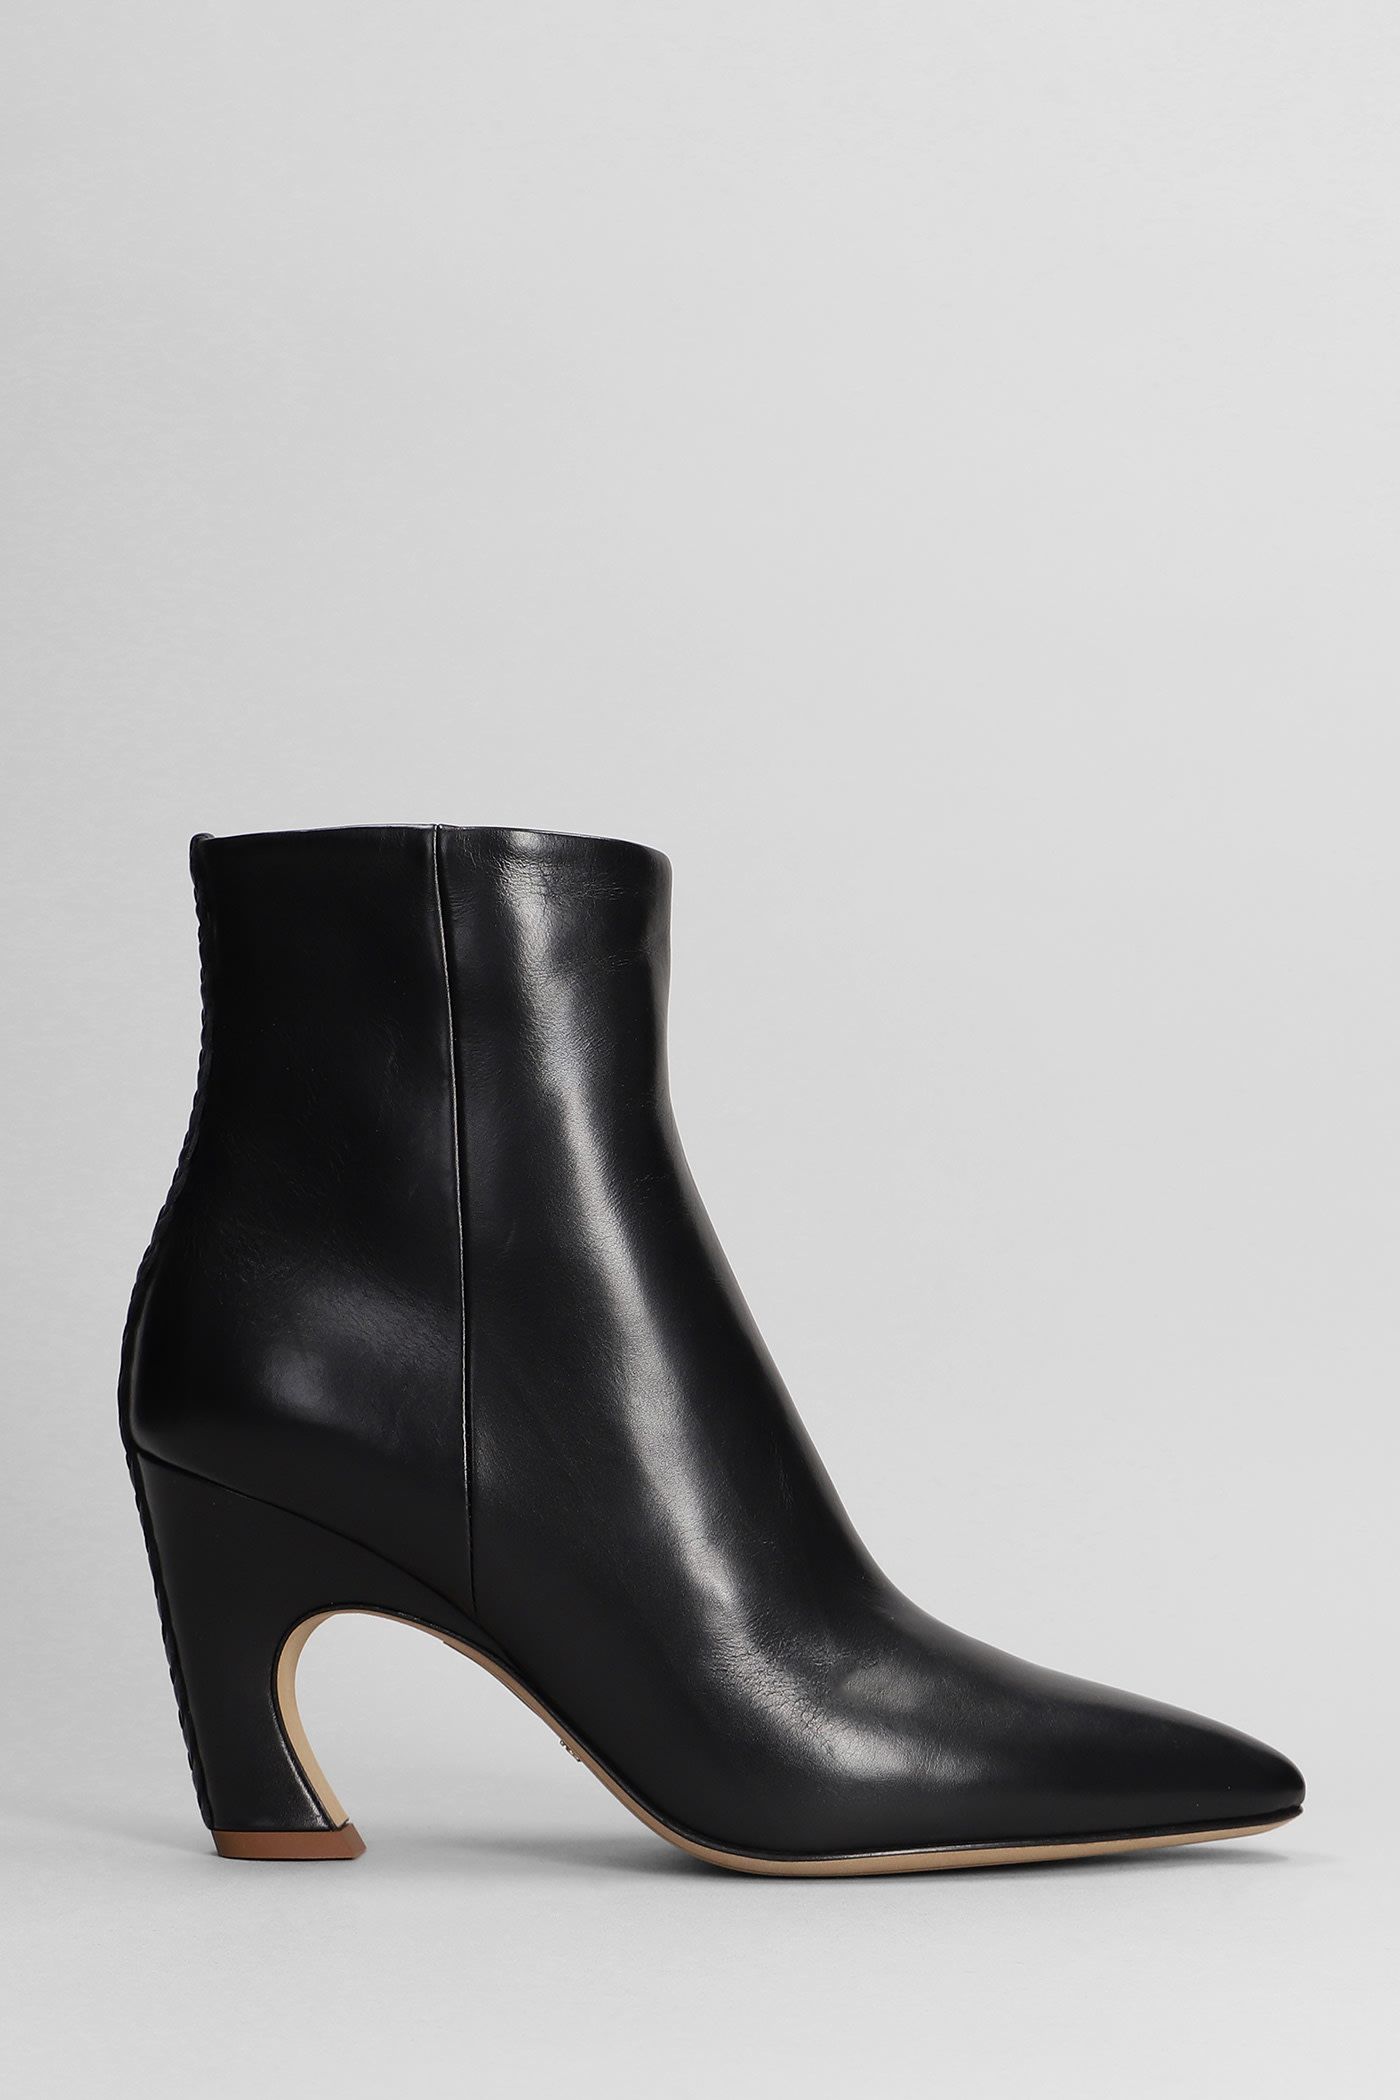 CHLOÉ ANKLE BOOTS IN BLACK LEATHER